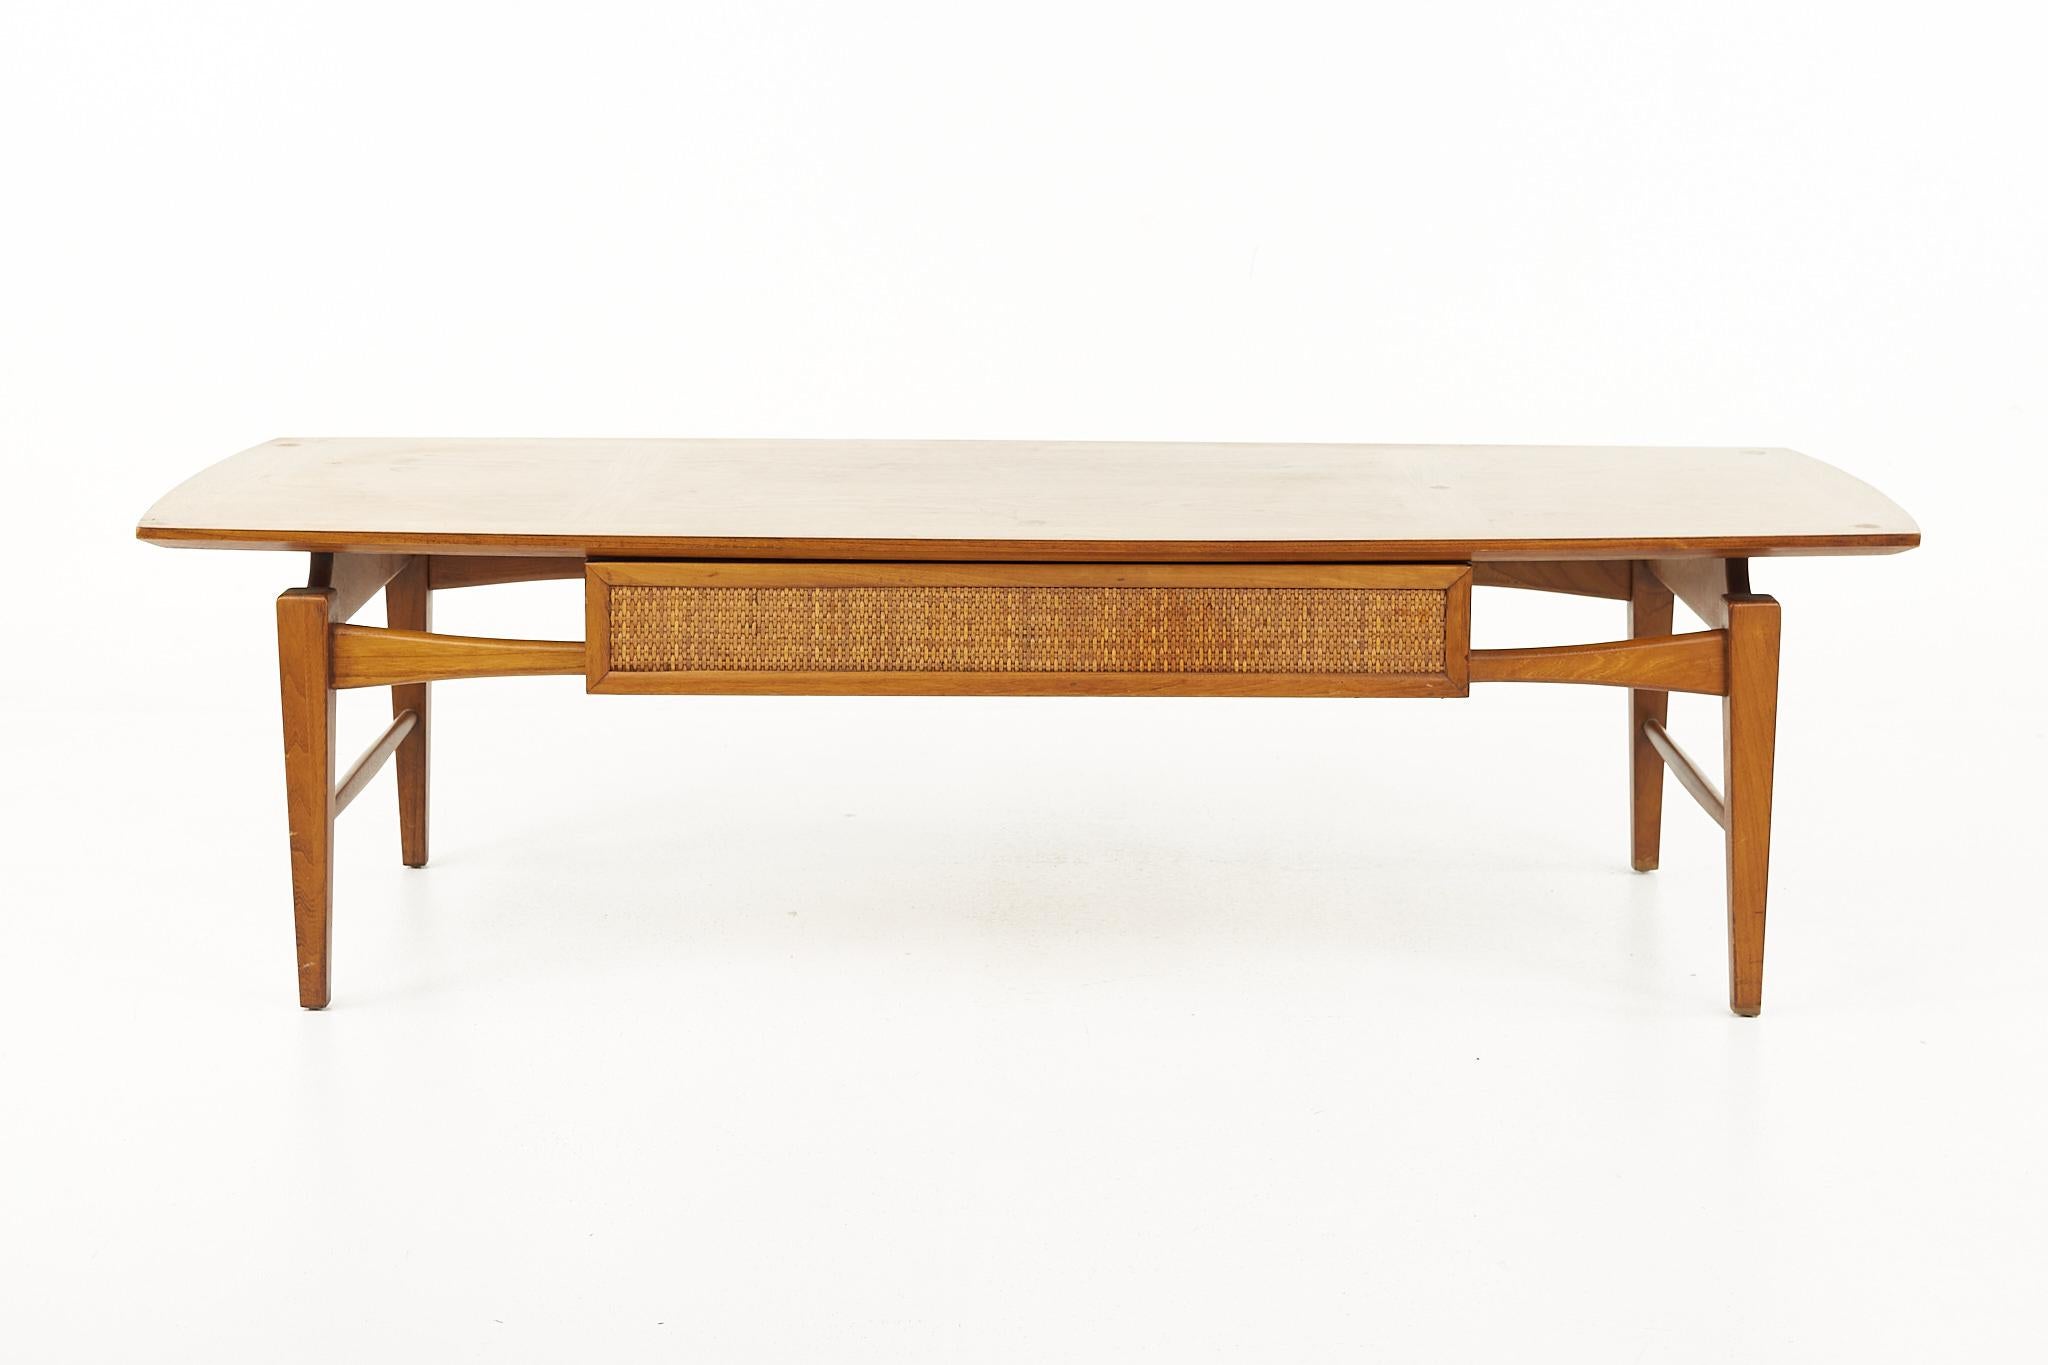 Lane Esteem mid century walnut and cane front inlaid coffee table 

The coffee table measures: 53 wide x 19 deep x 15 inches high

All pieces of furniture can be had in what we call restored vintage condition. That means the piece is restored